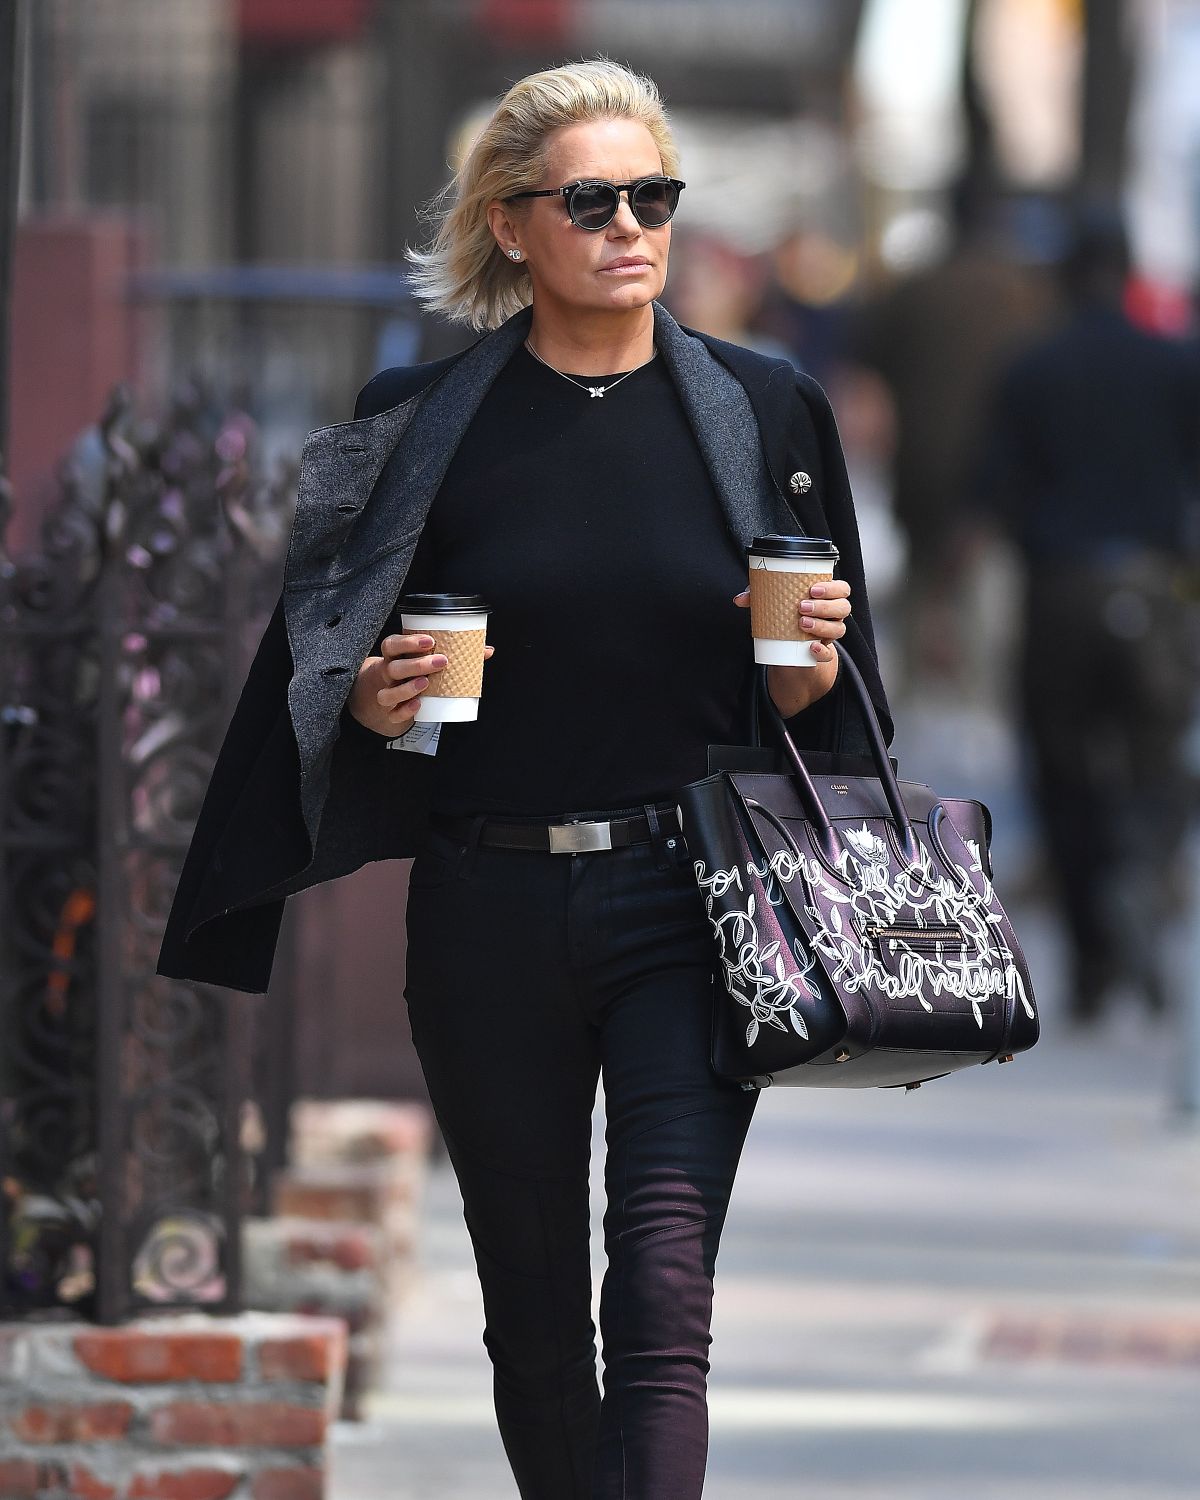 YOLANDA HADID Out and About in New York 04/10/2017 – HawtCelebs